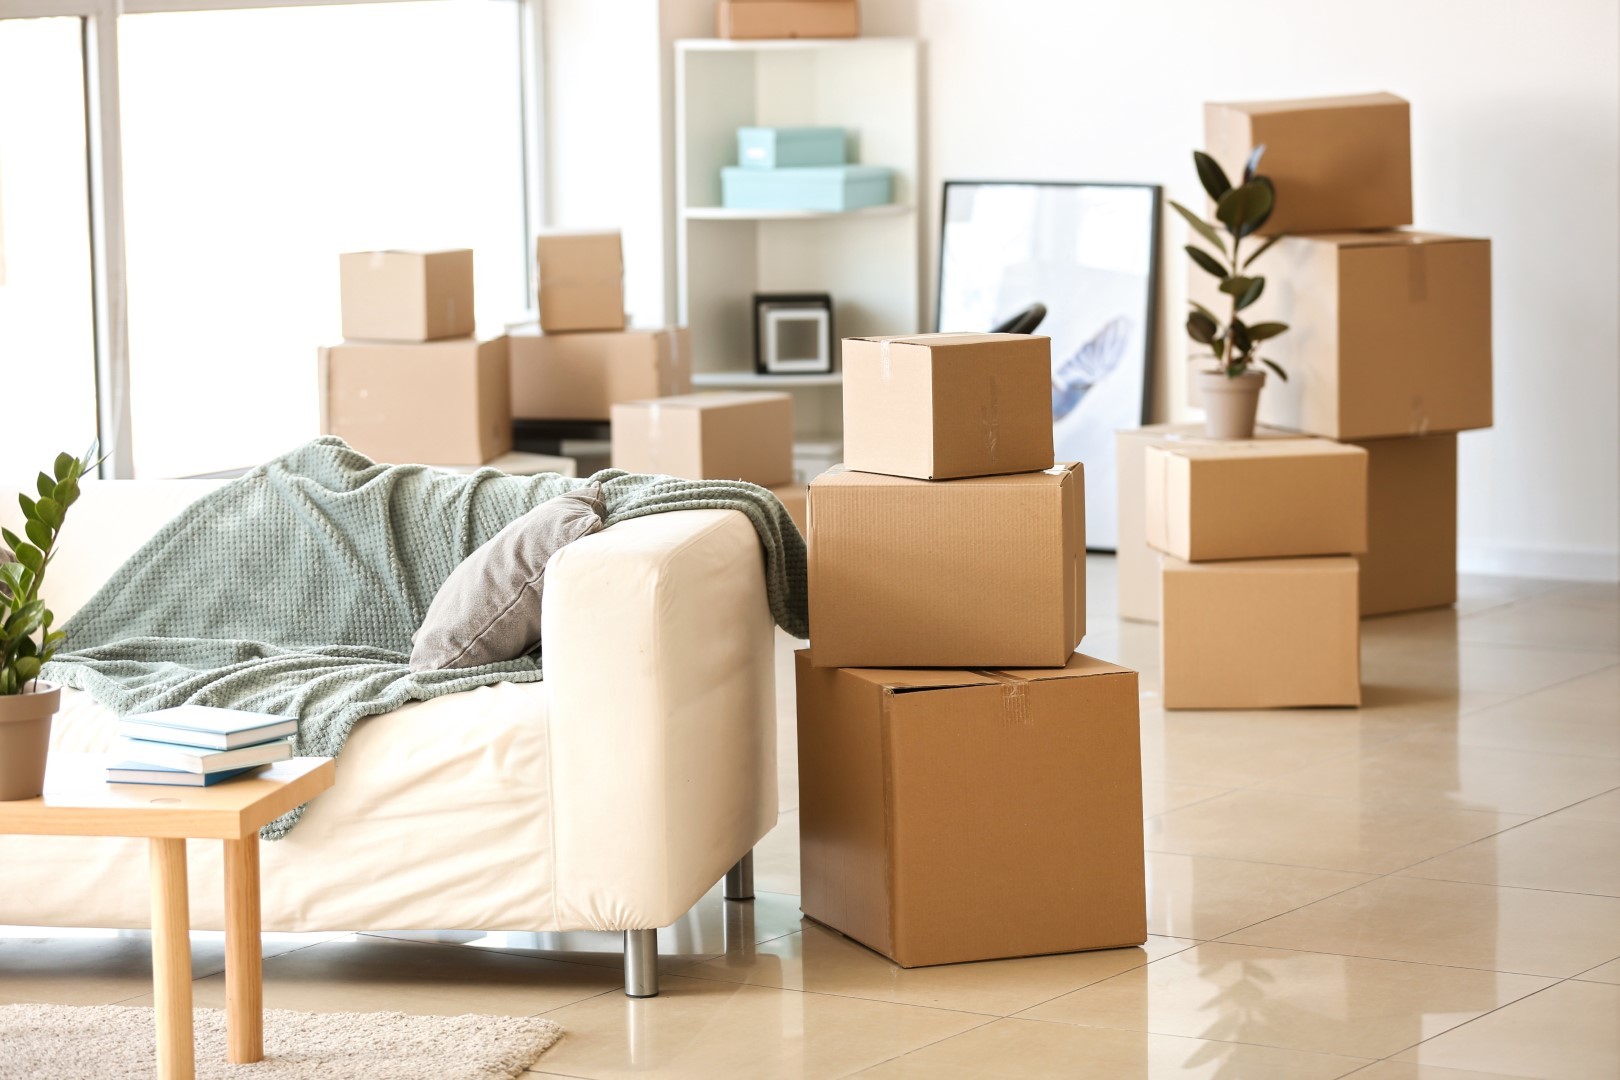 Moving into a new home. How does possession work?